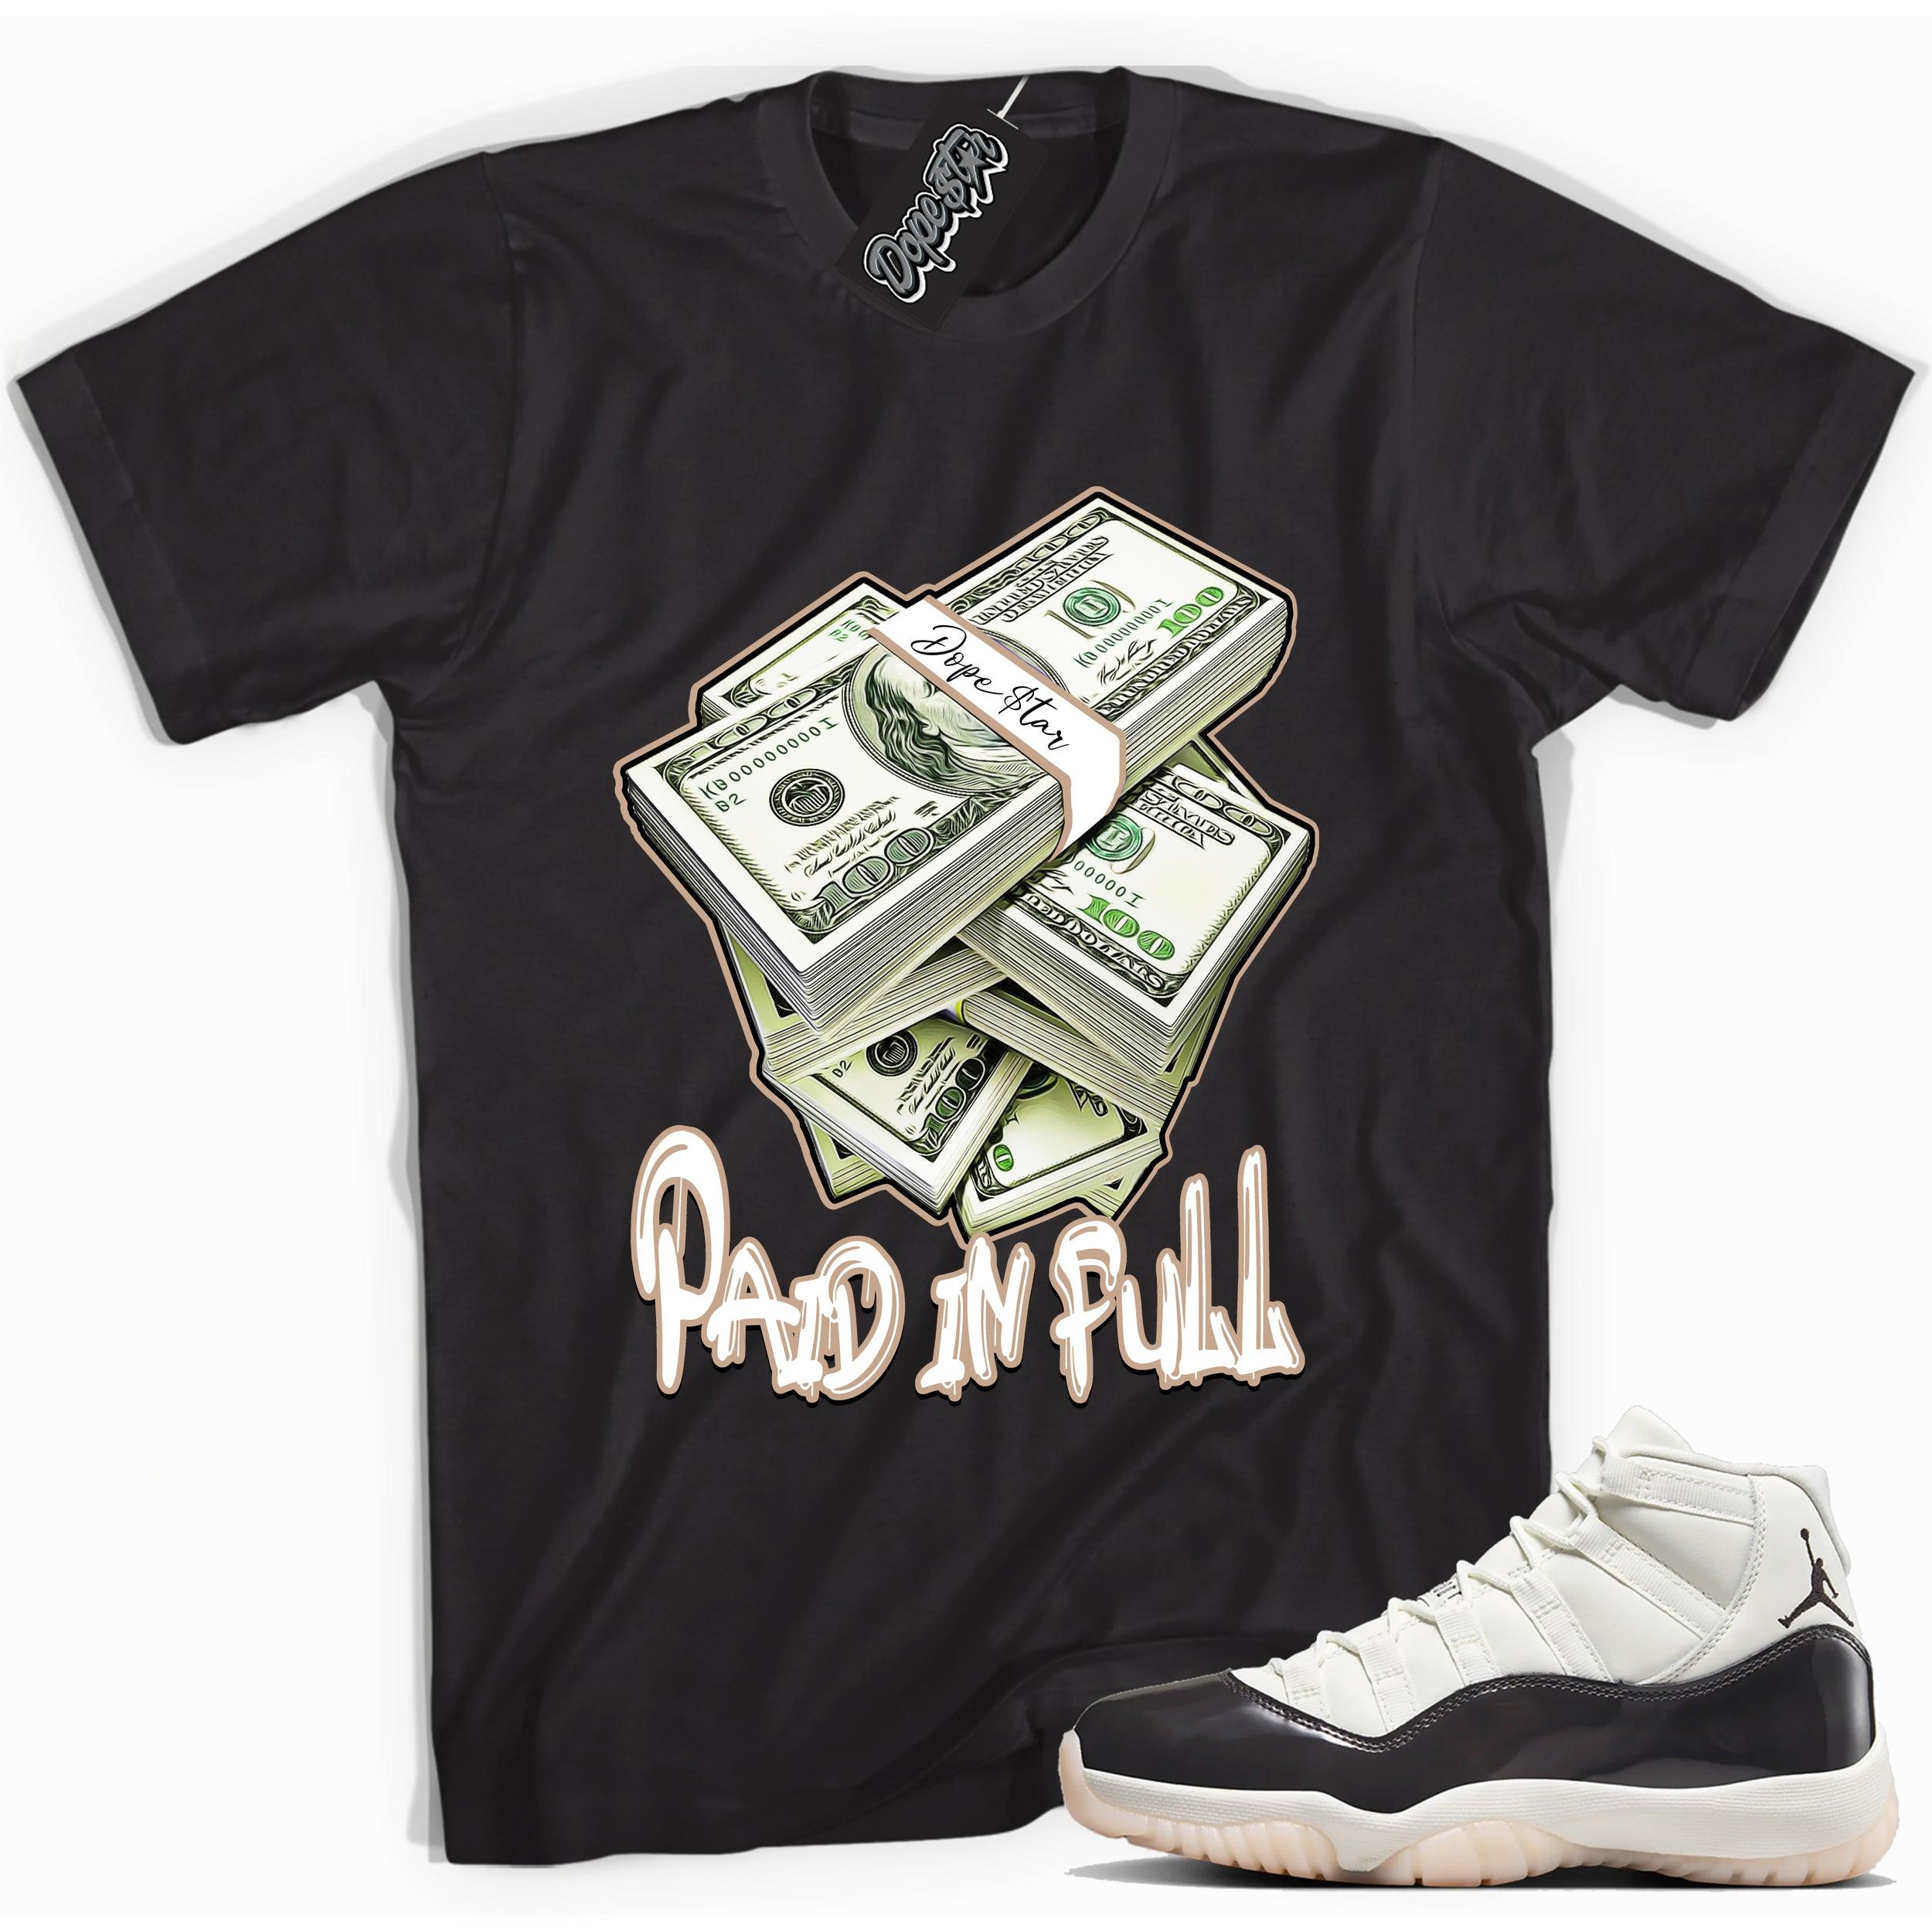 Cool Black graphic tee with “ Paid In Full ” print, that perfectly matches Air Jordan 11 Neapolitan sneakers 